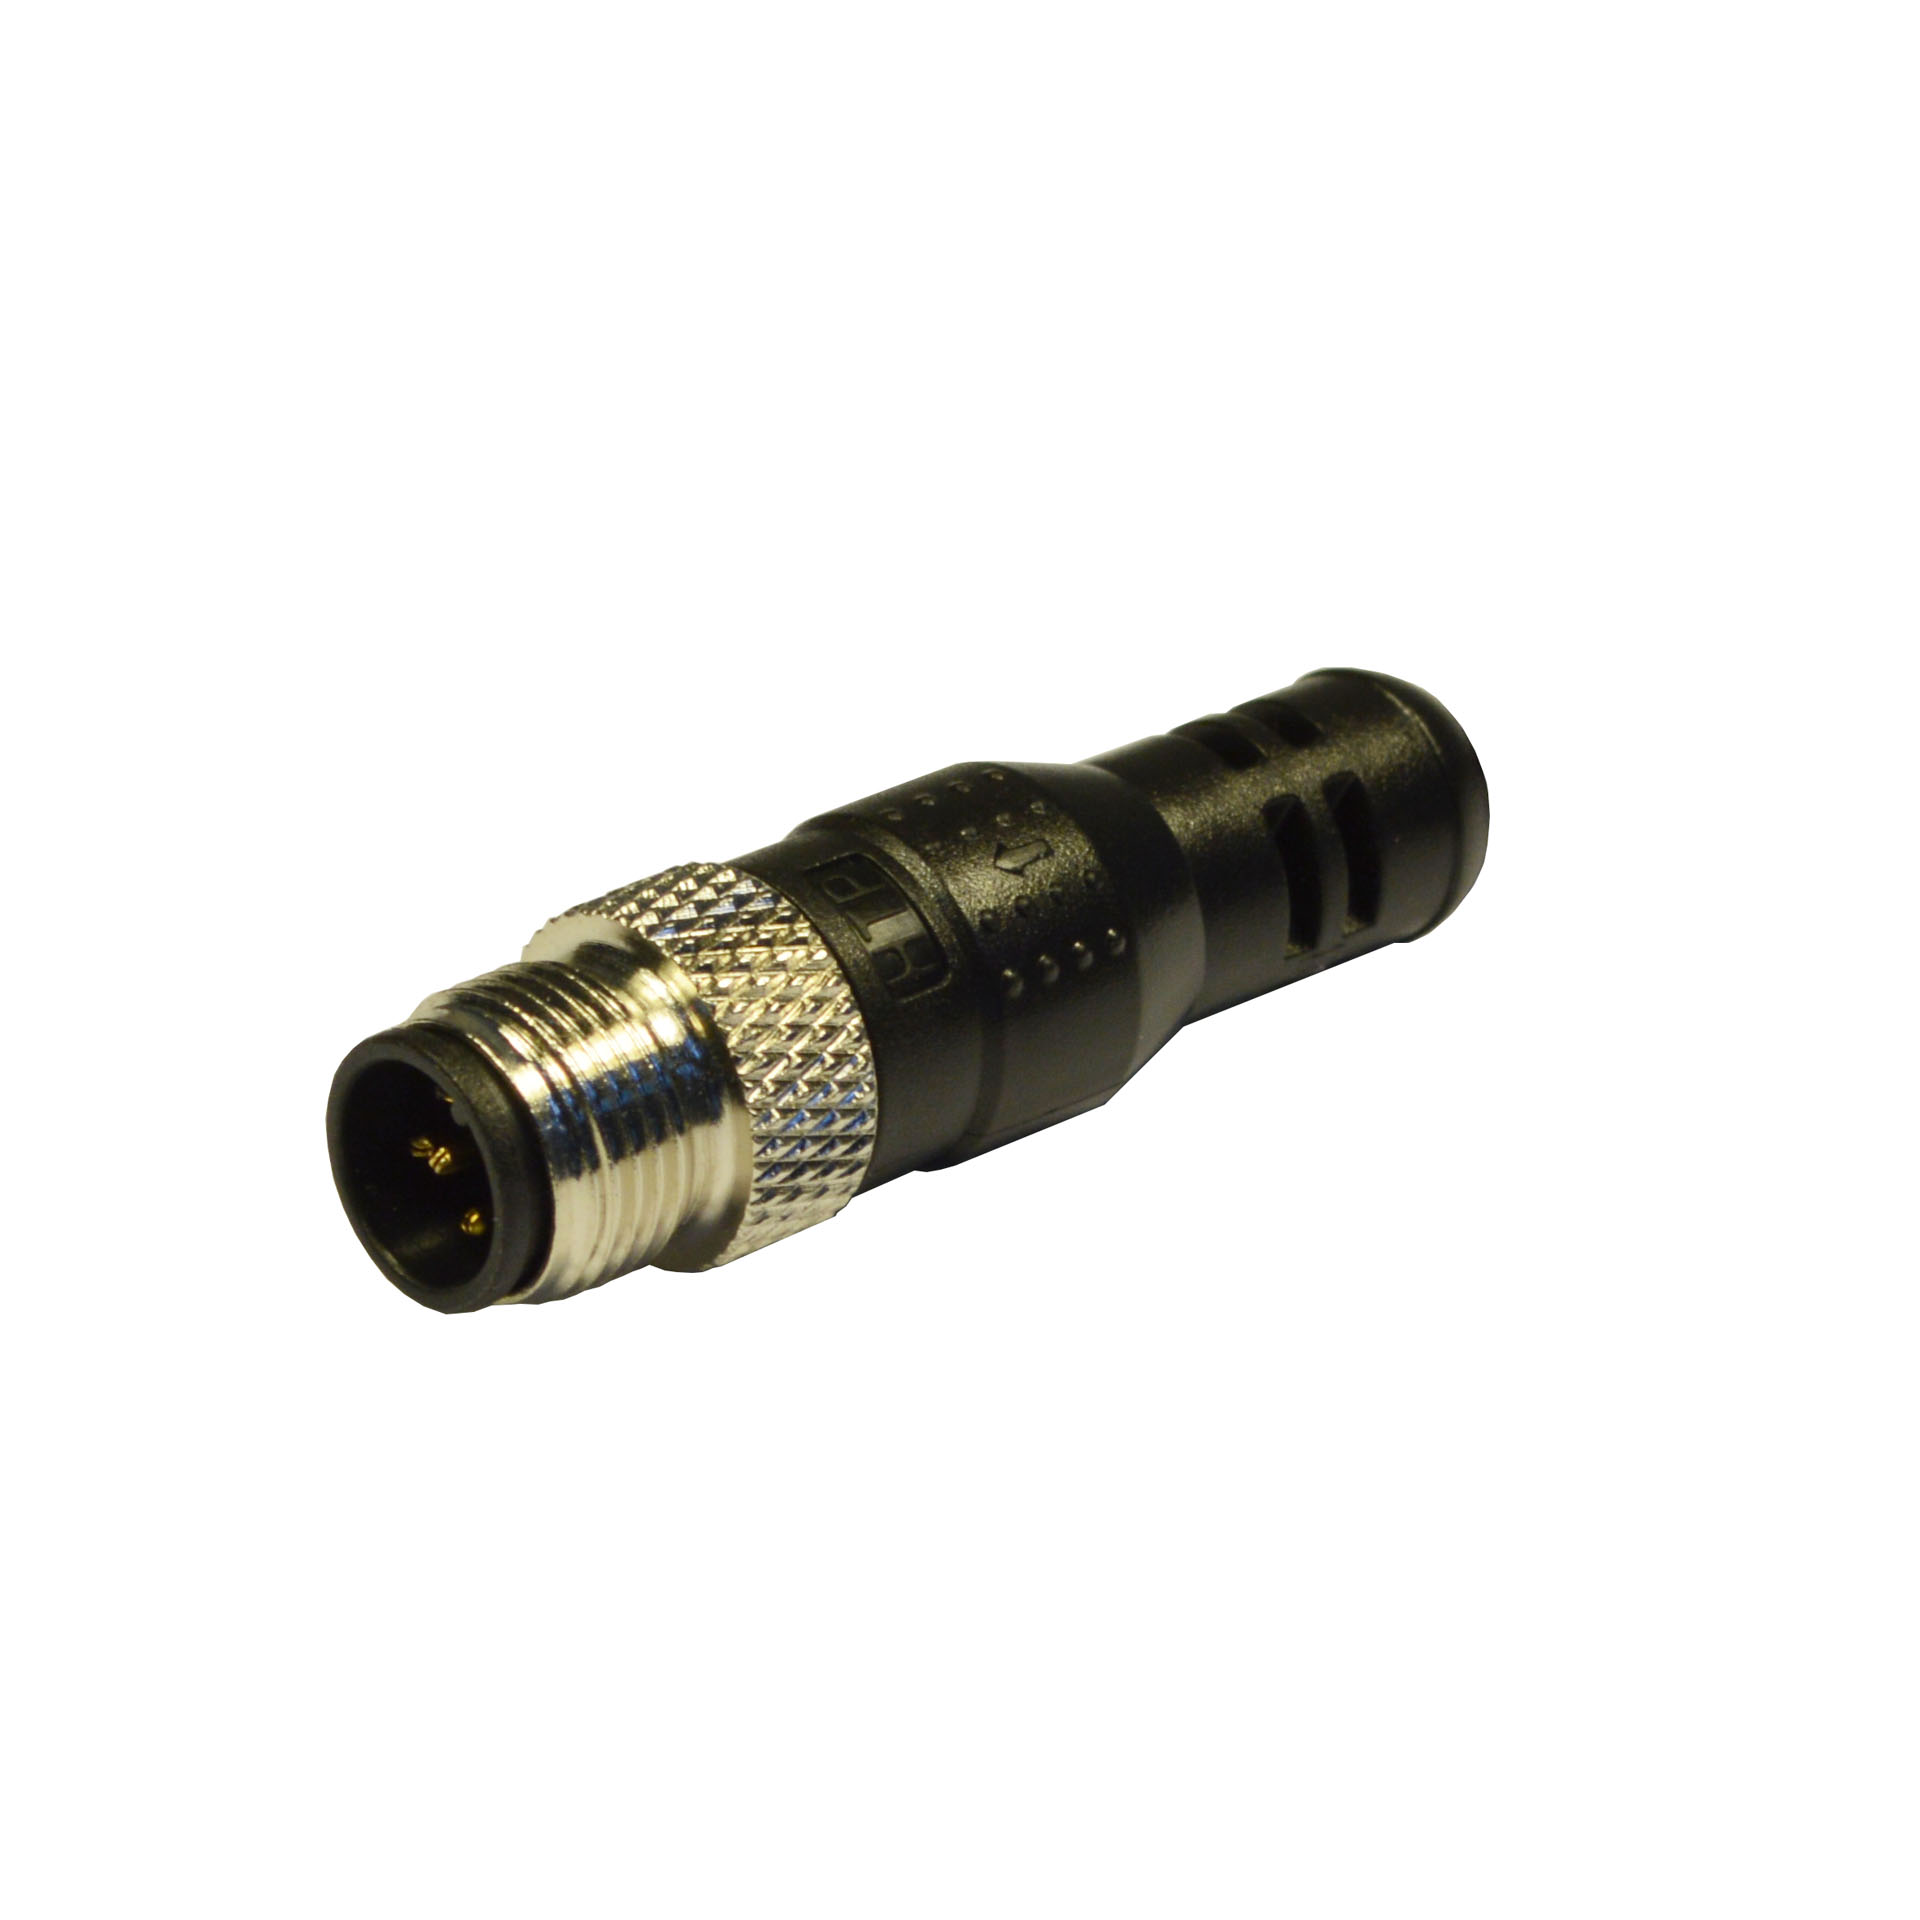 Terminal connector M12 male straight 180° 5poles with resistance 120Ohm between poles 4-5.